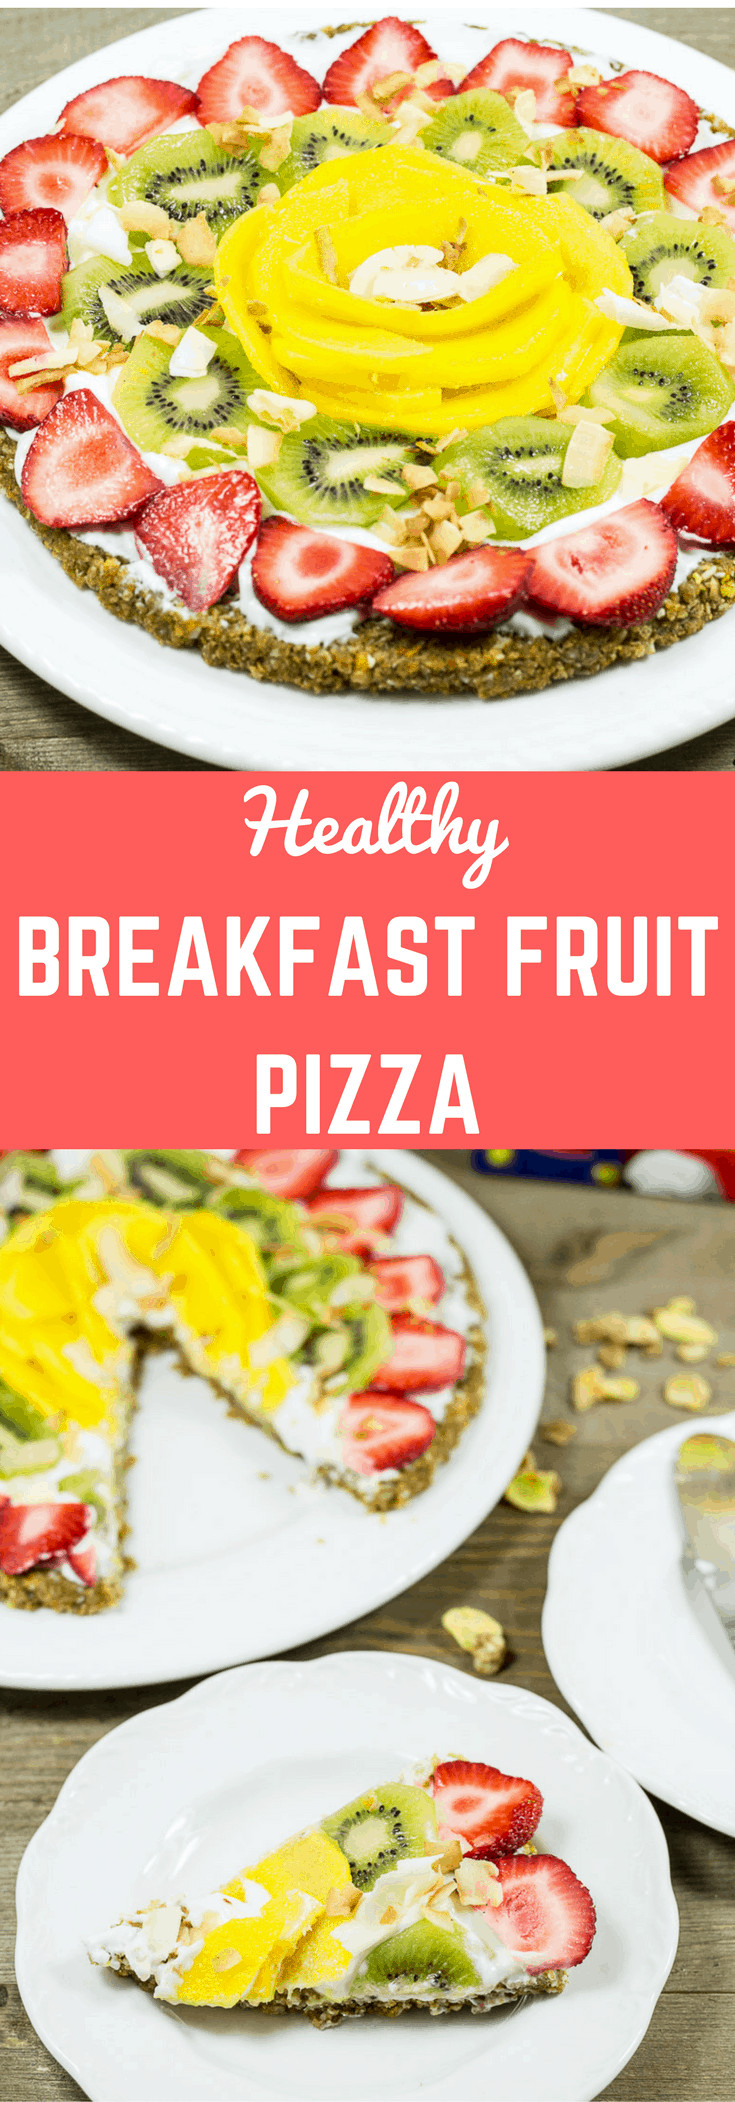 Healthy Breakfast Pizza
 BREAKFAST PIZZA WITH CEREAL CRUST